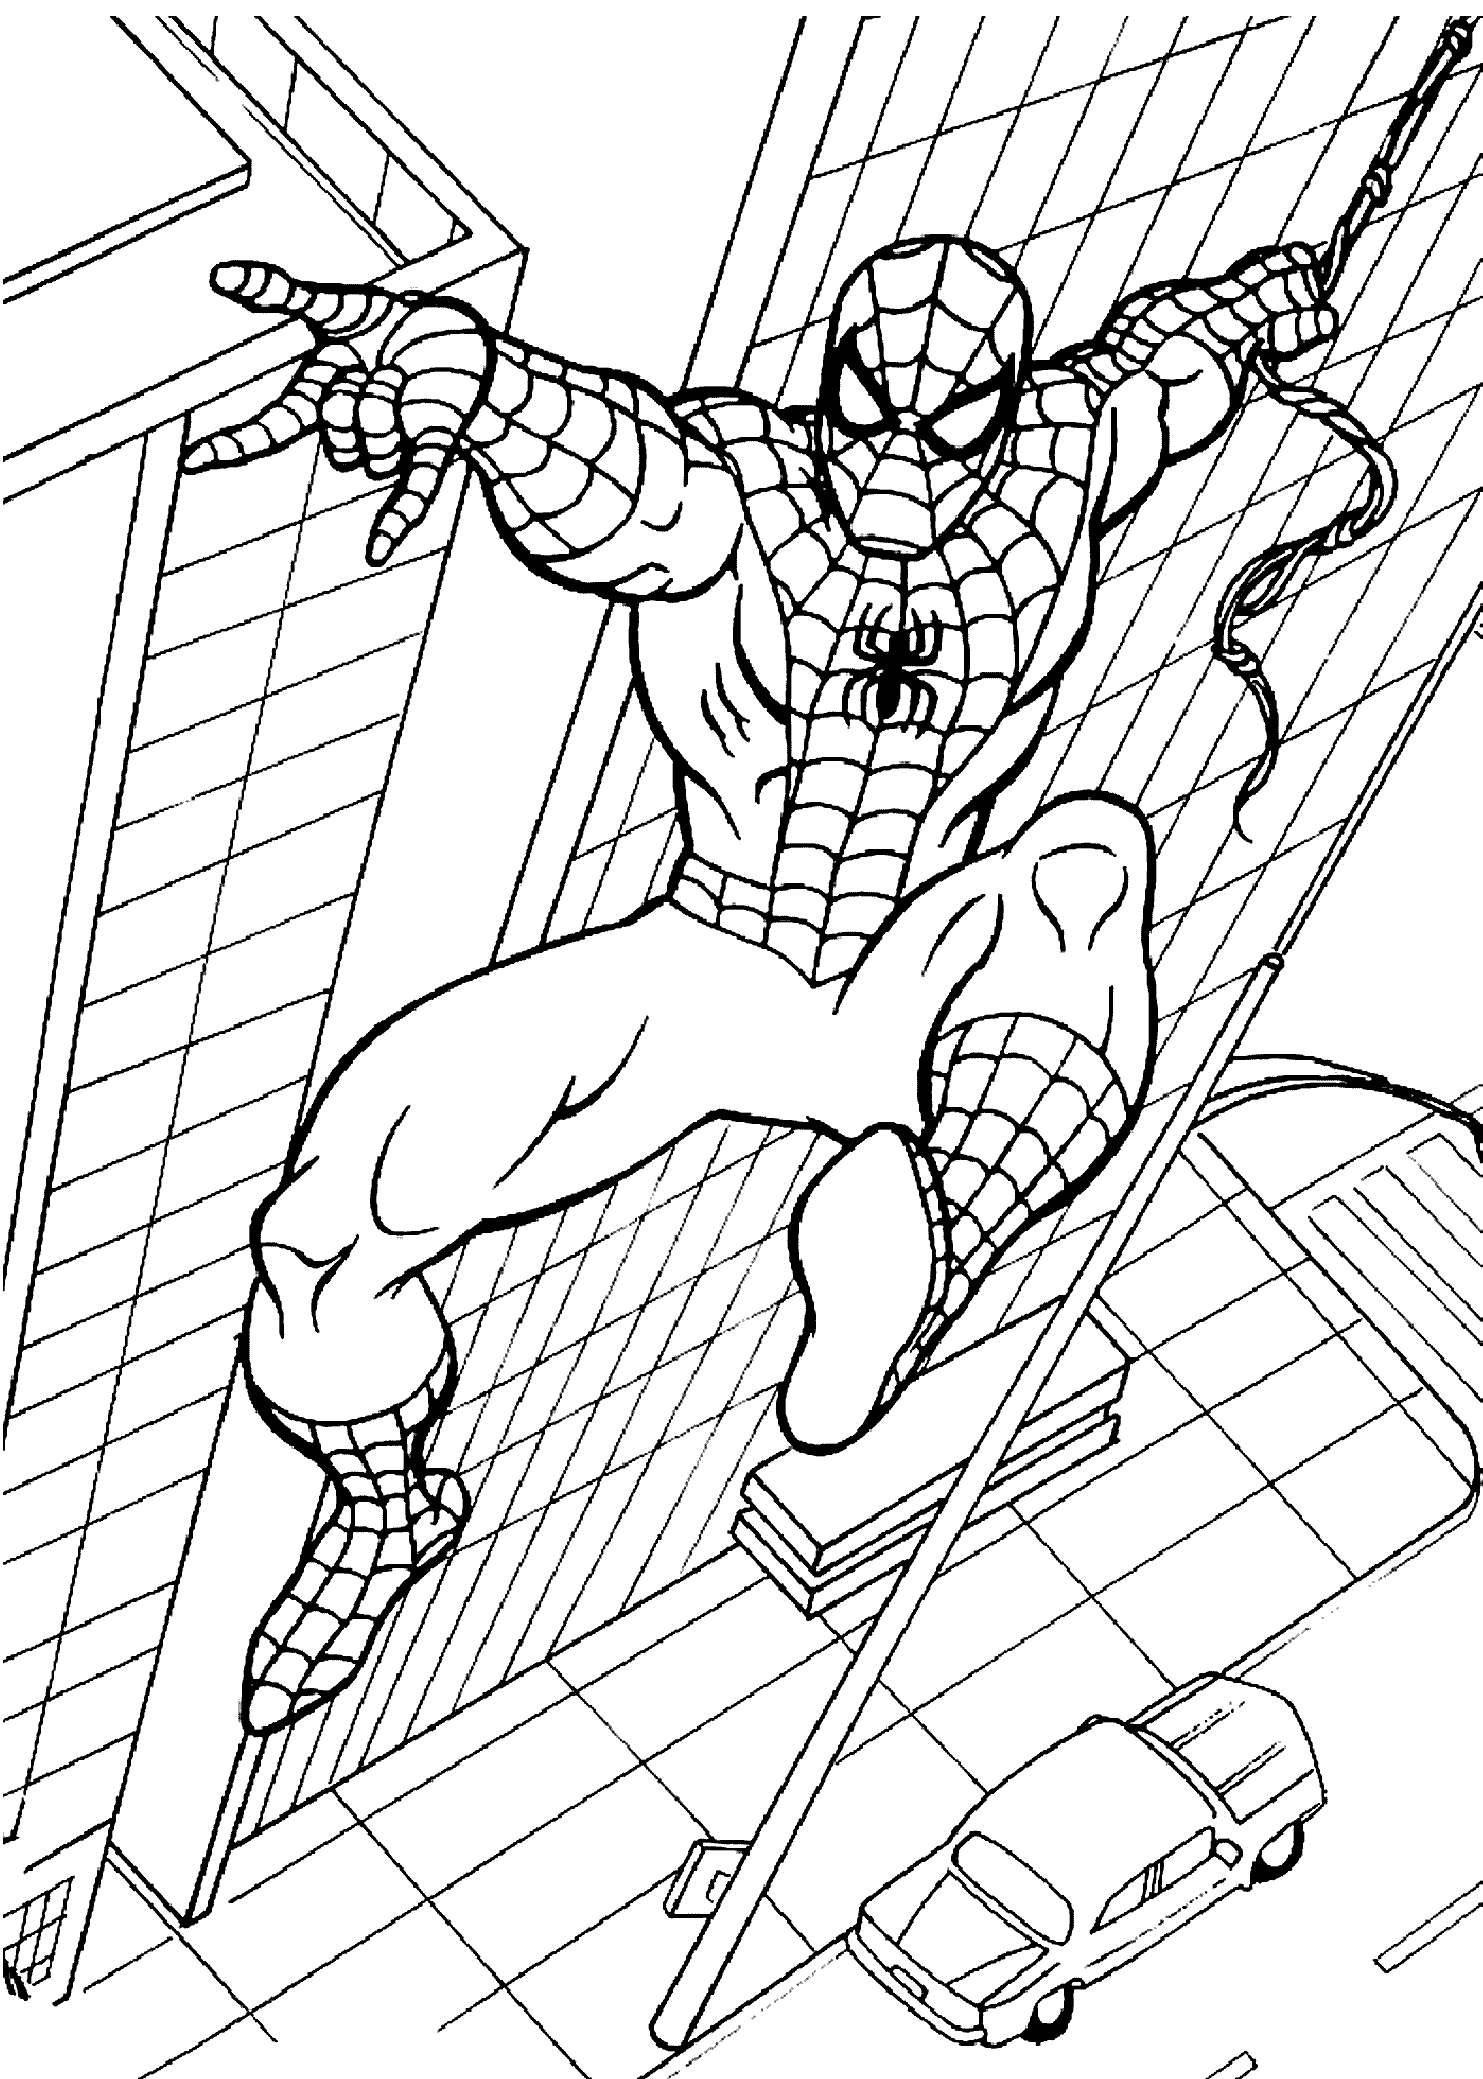 Spider man in city coloring pages for kids printable free spiderman coloring superhero coloring pages cartoon coloring pages